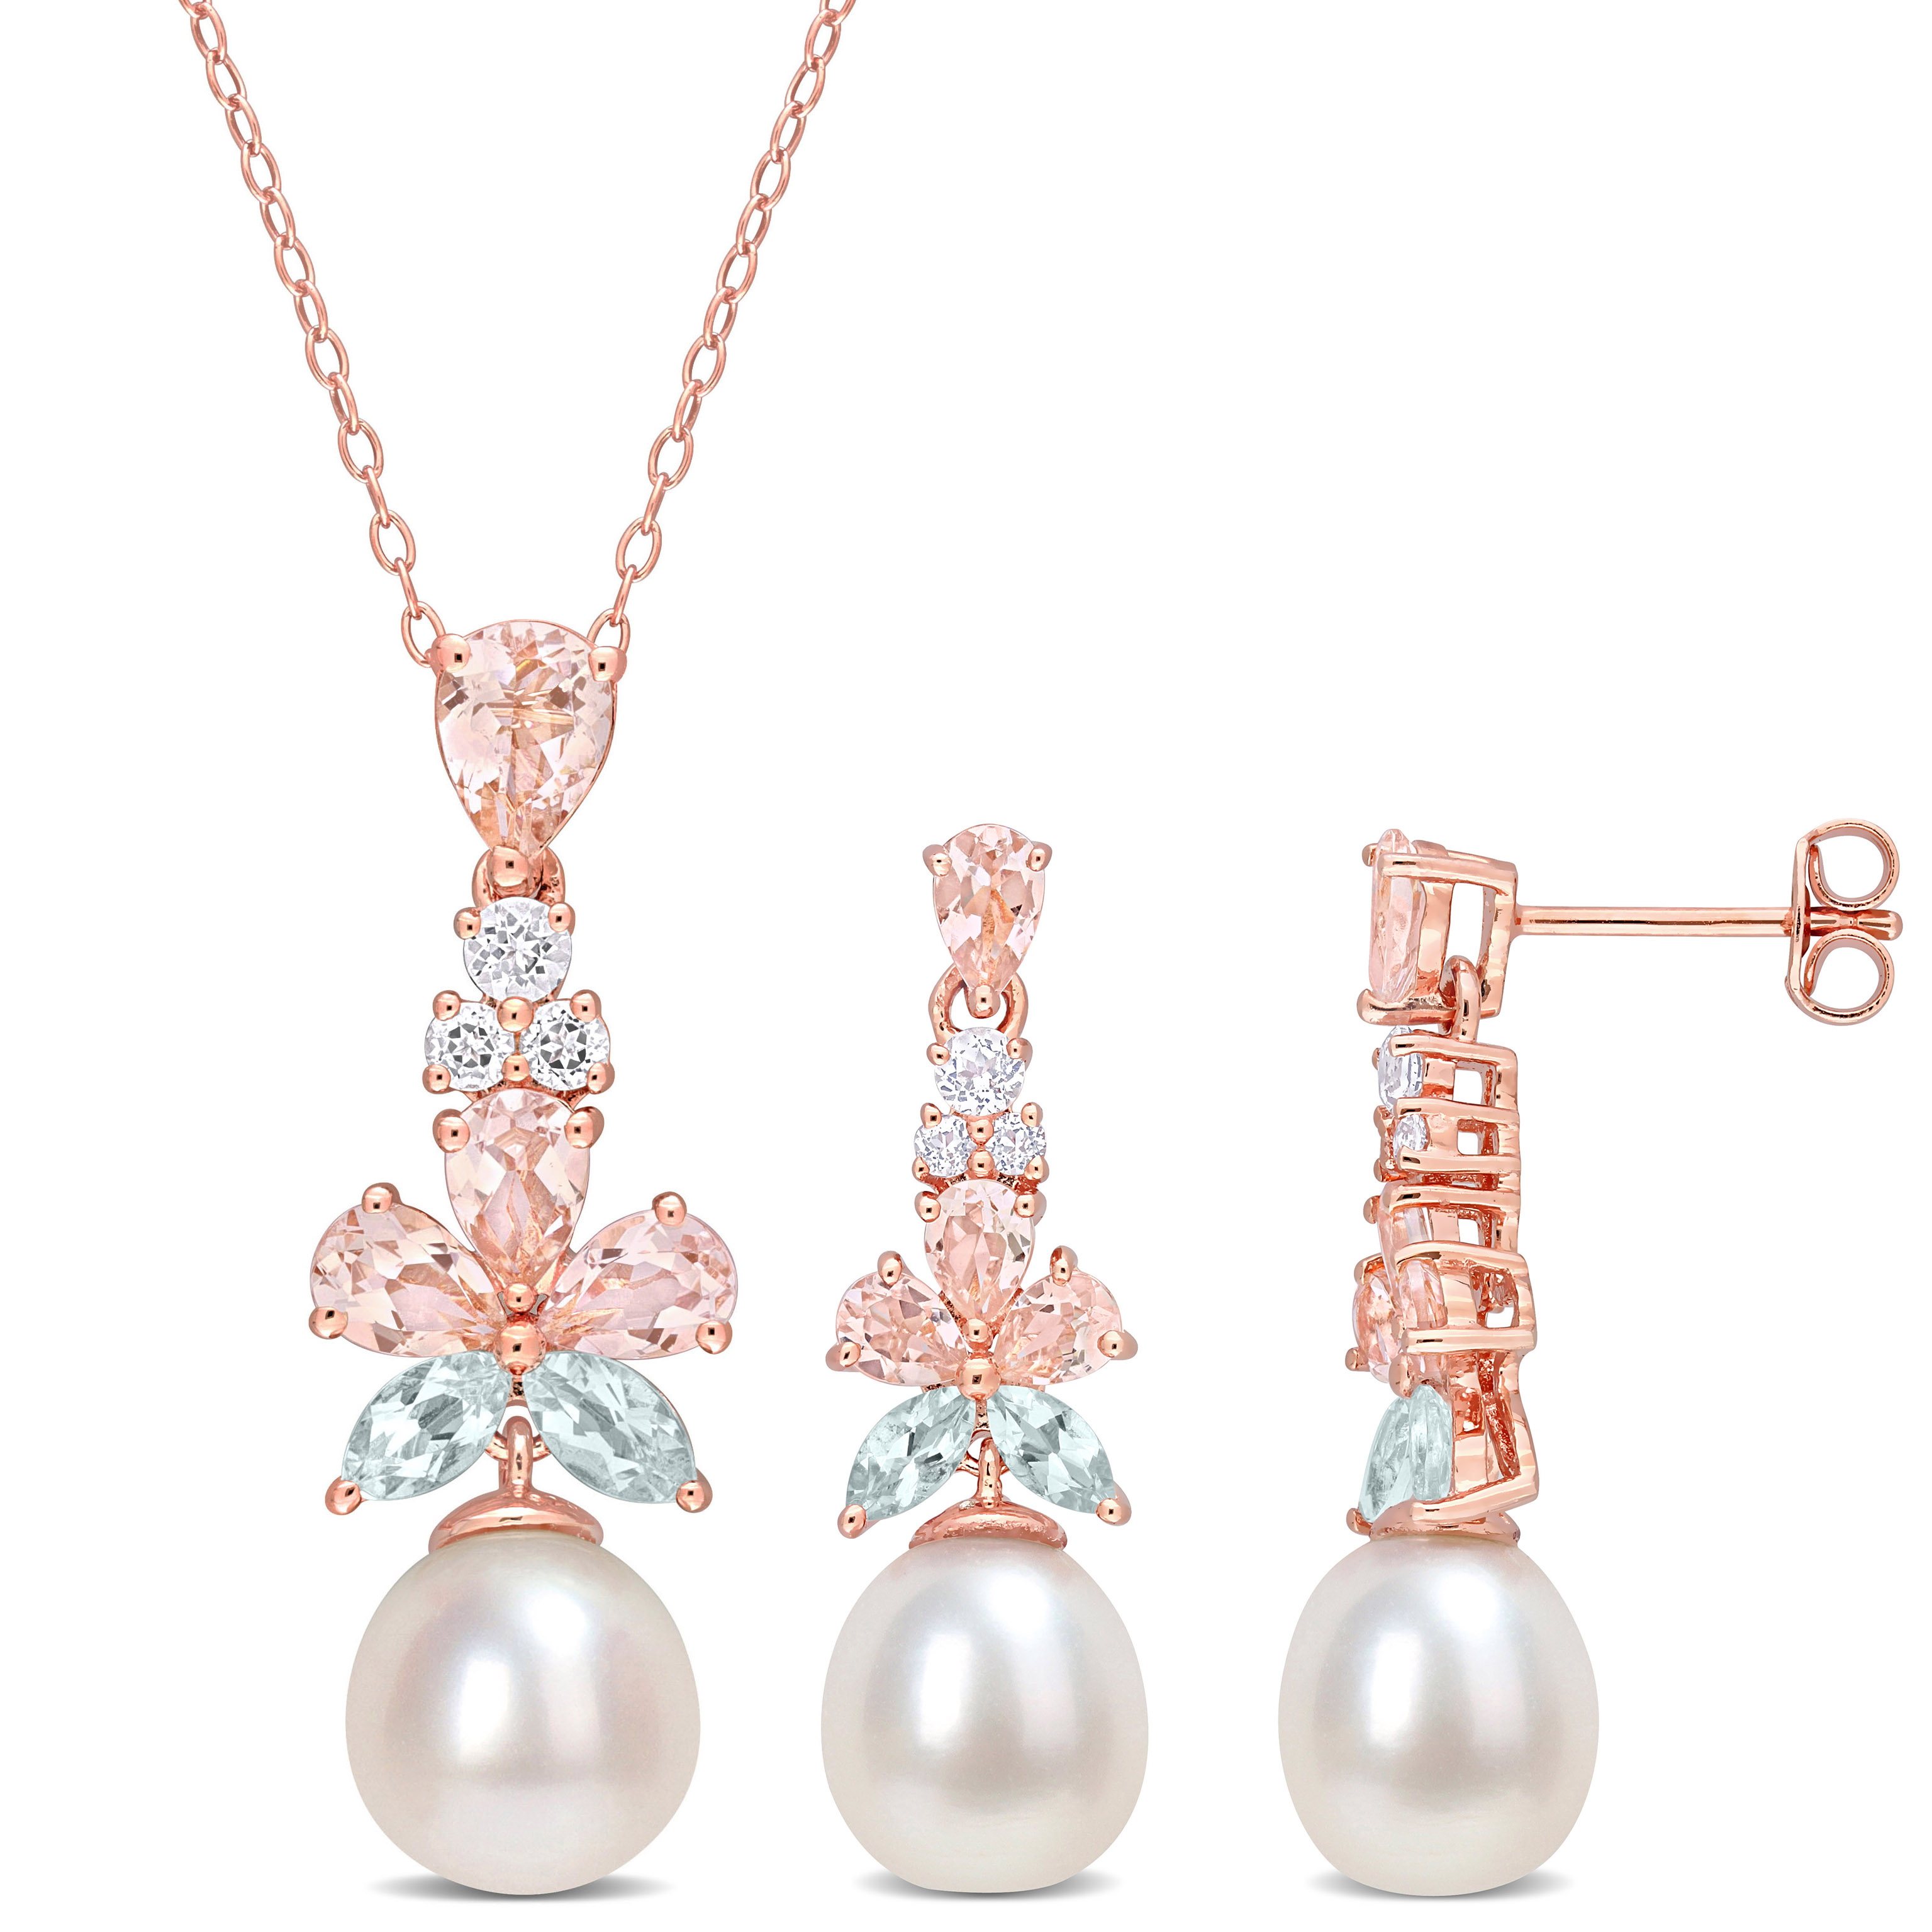 8.5-10 MM Cultured Freshwater Rice Pearl and 5 CT TGW Marquise-Cut Aquamarine Pear-Cut Morganite White Topaz 2-Piece Drop Necklace and Earrings Set in Rose Plated Sterling Silver